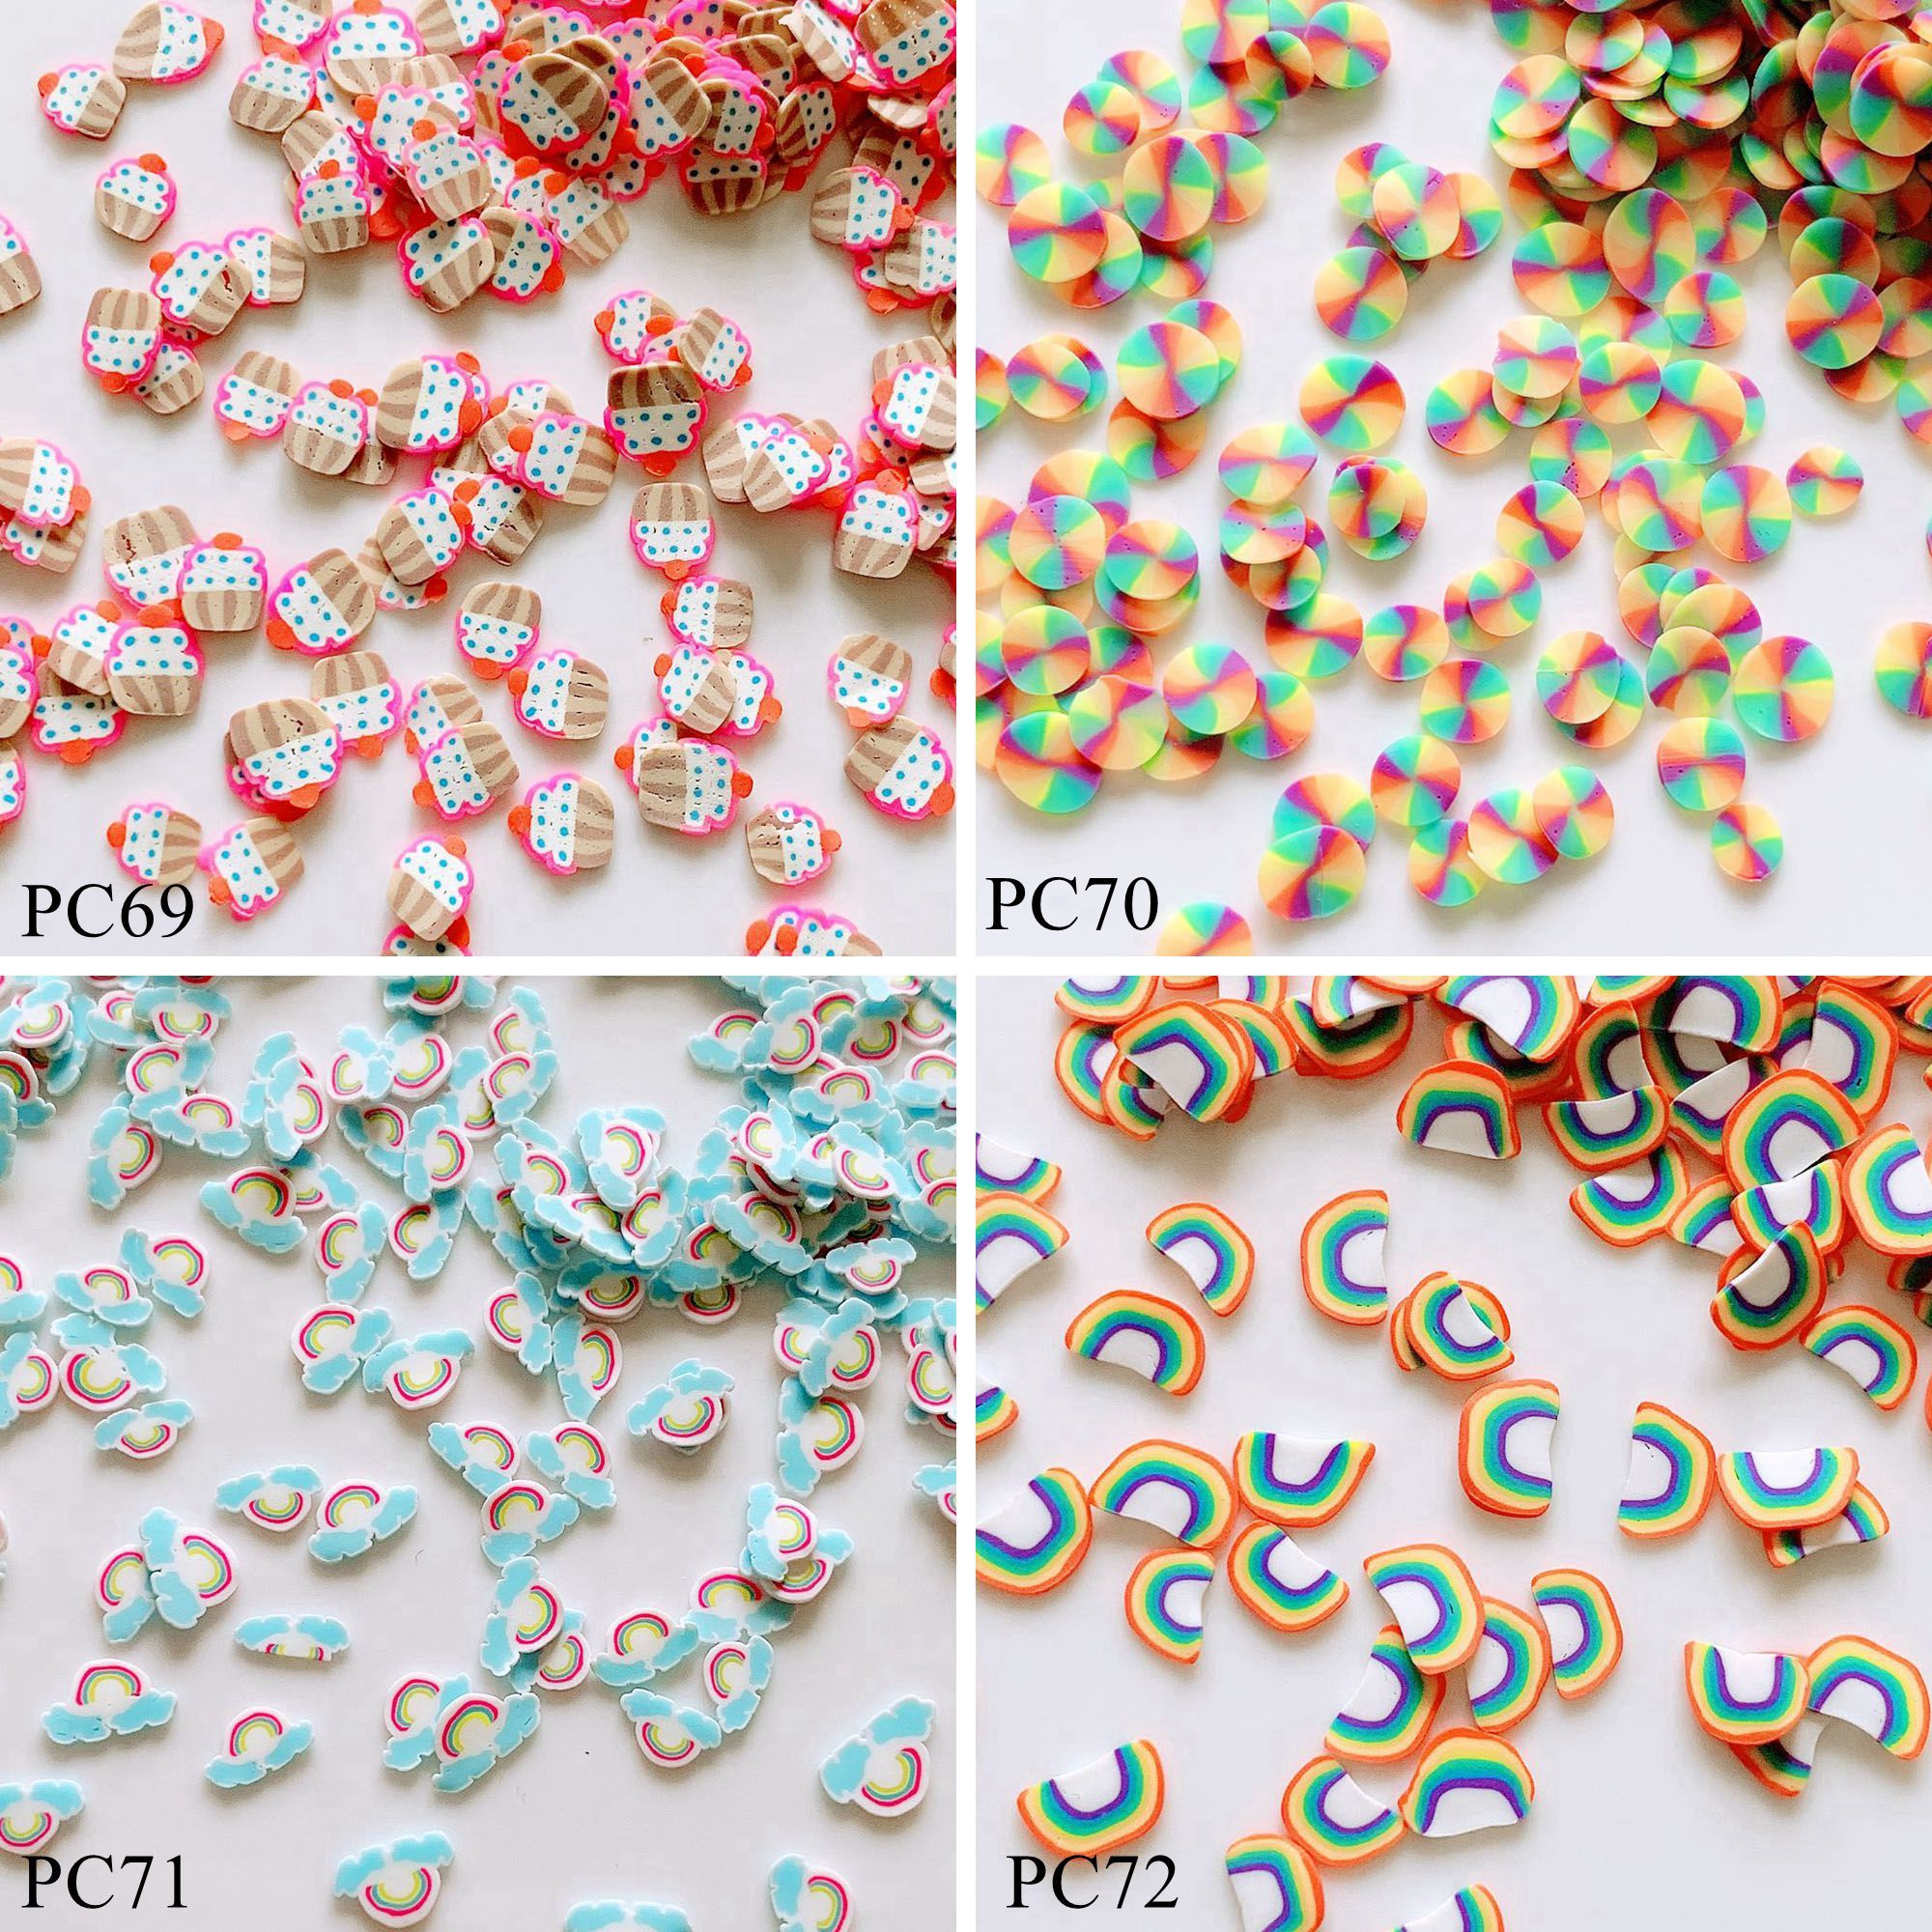 20g/bag Mixed Polymer Clay Slices 3D 5mm Polymer Clay Sticker zodiac signs Constellation Shape Pieces PC103